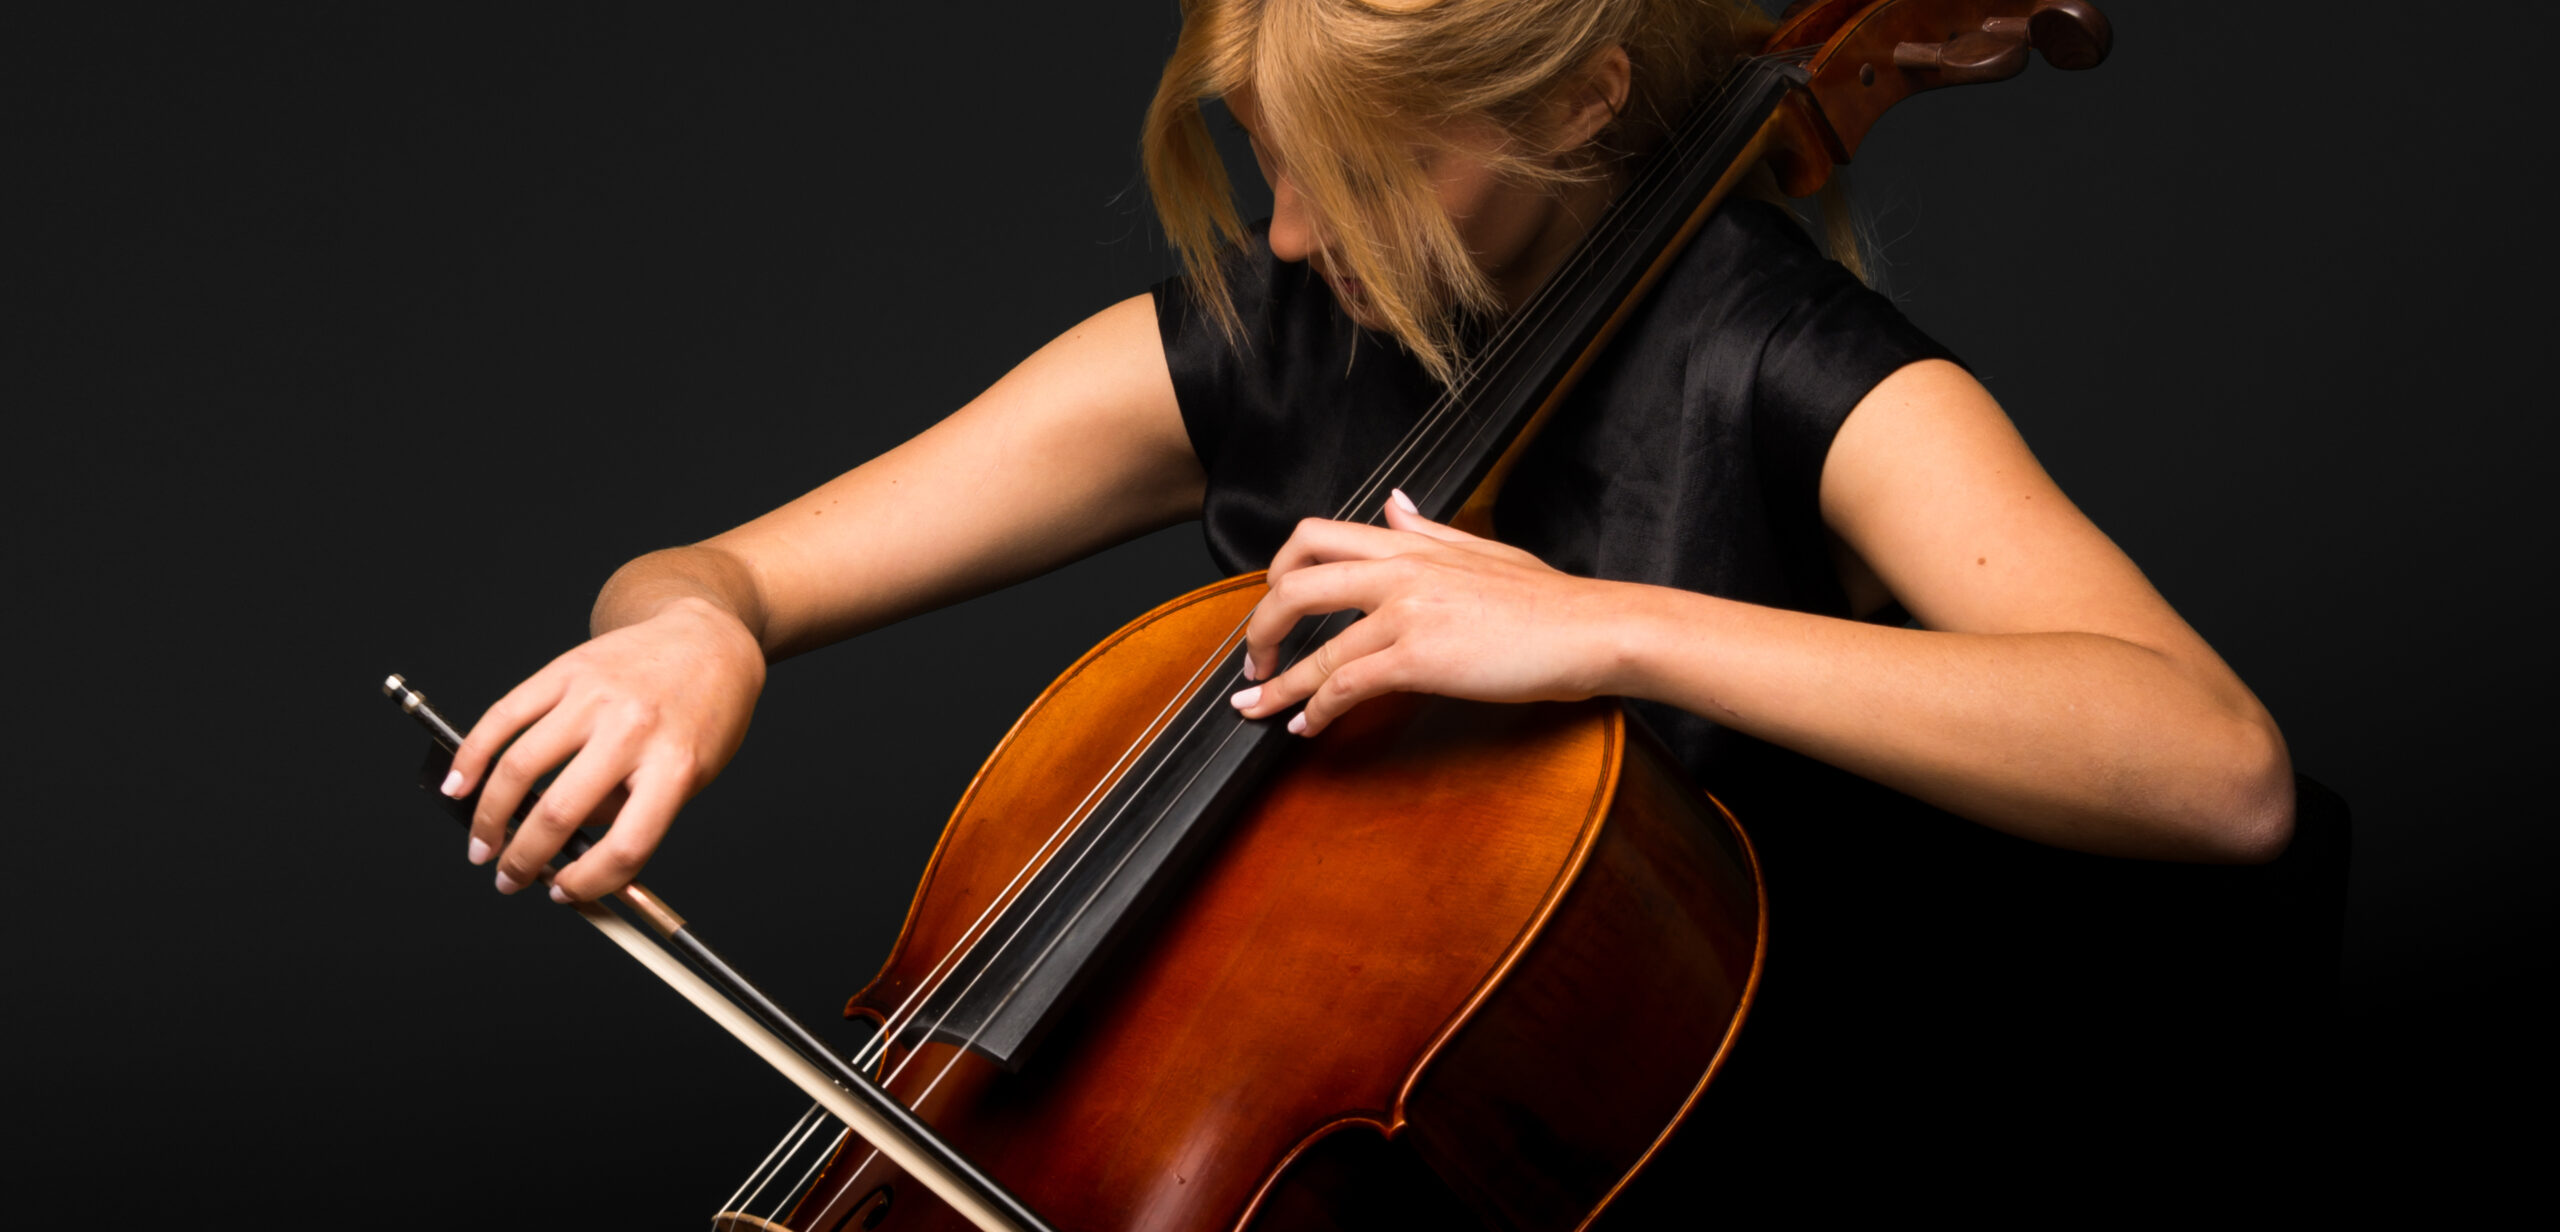 Young woman playing cello high up on the fingerboard